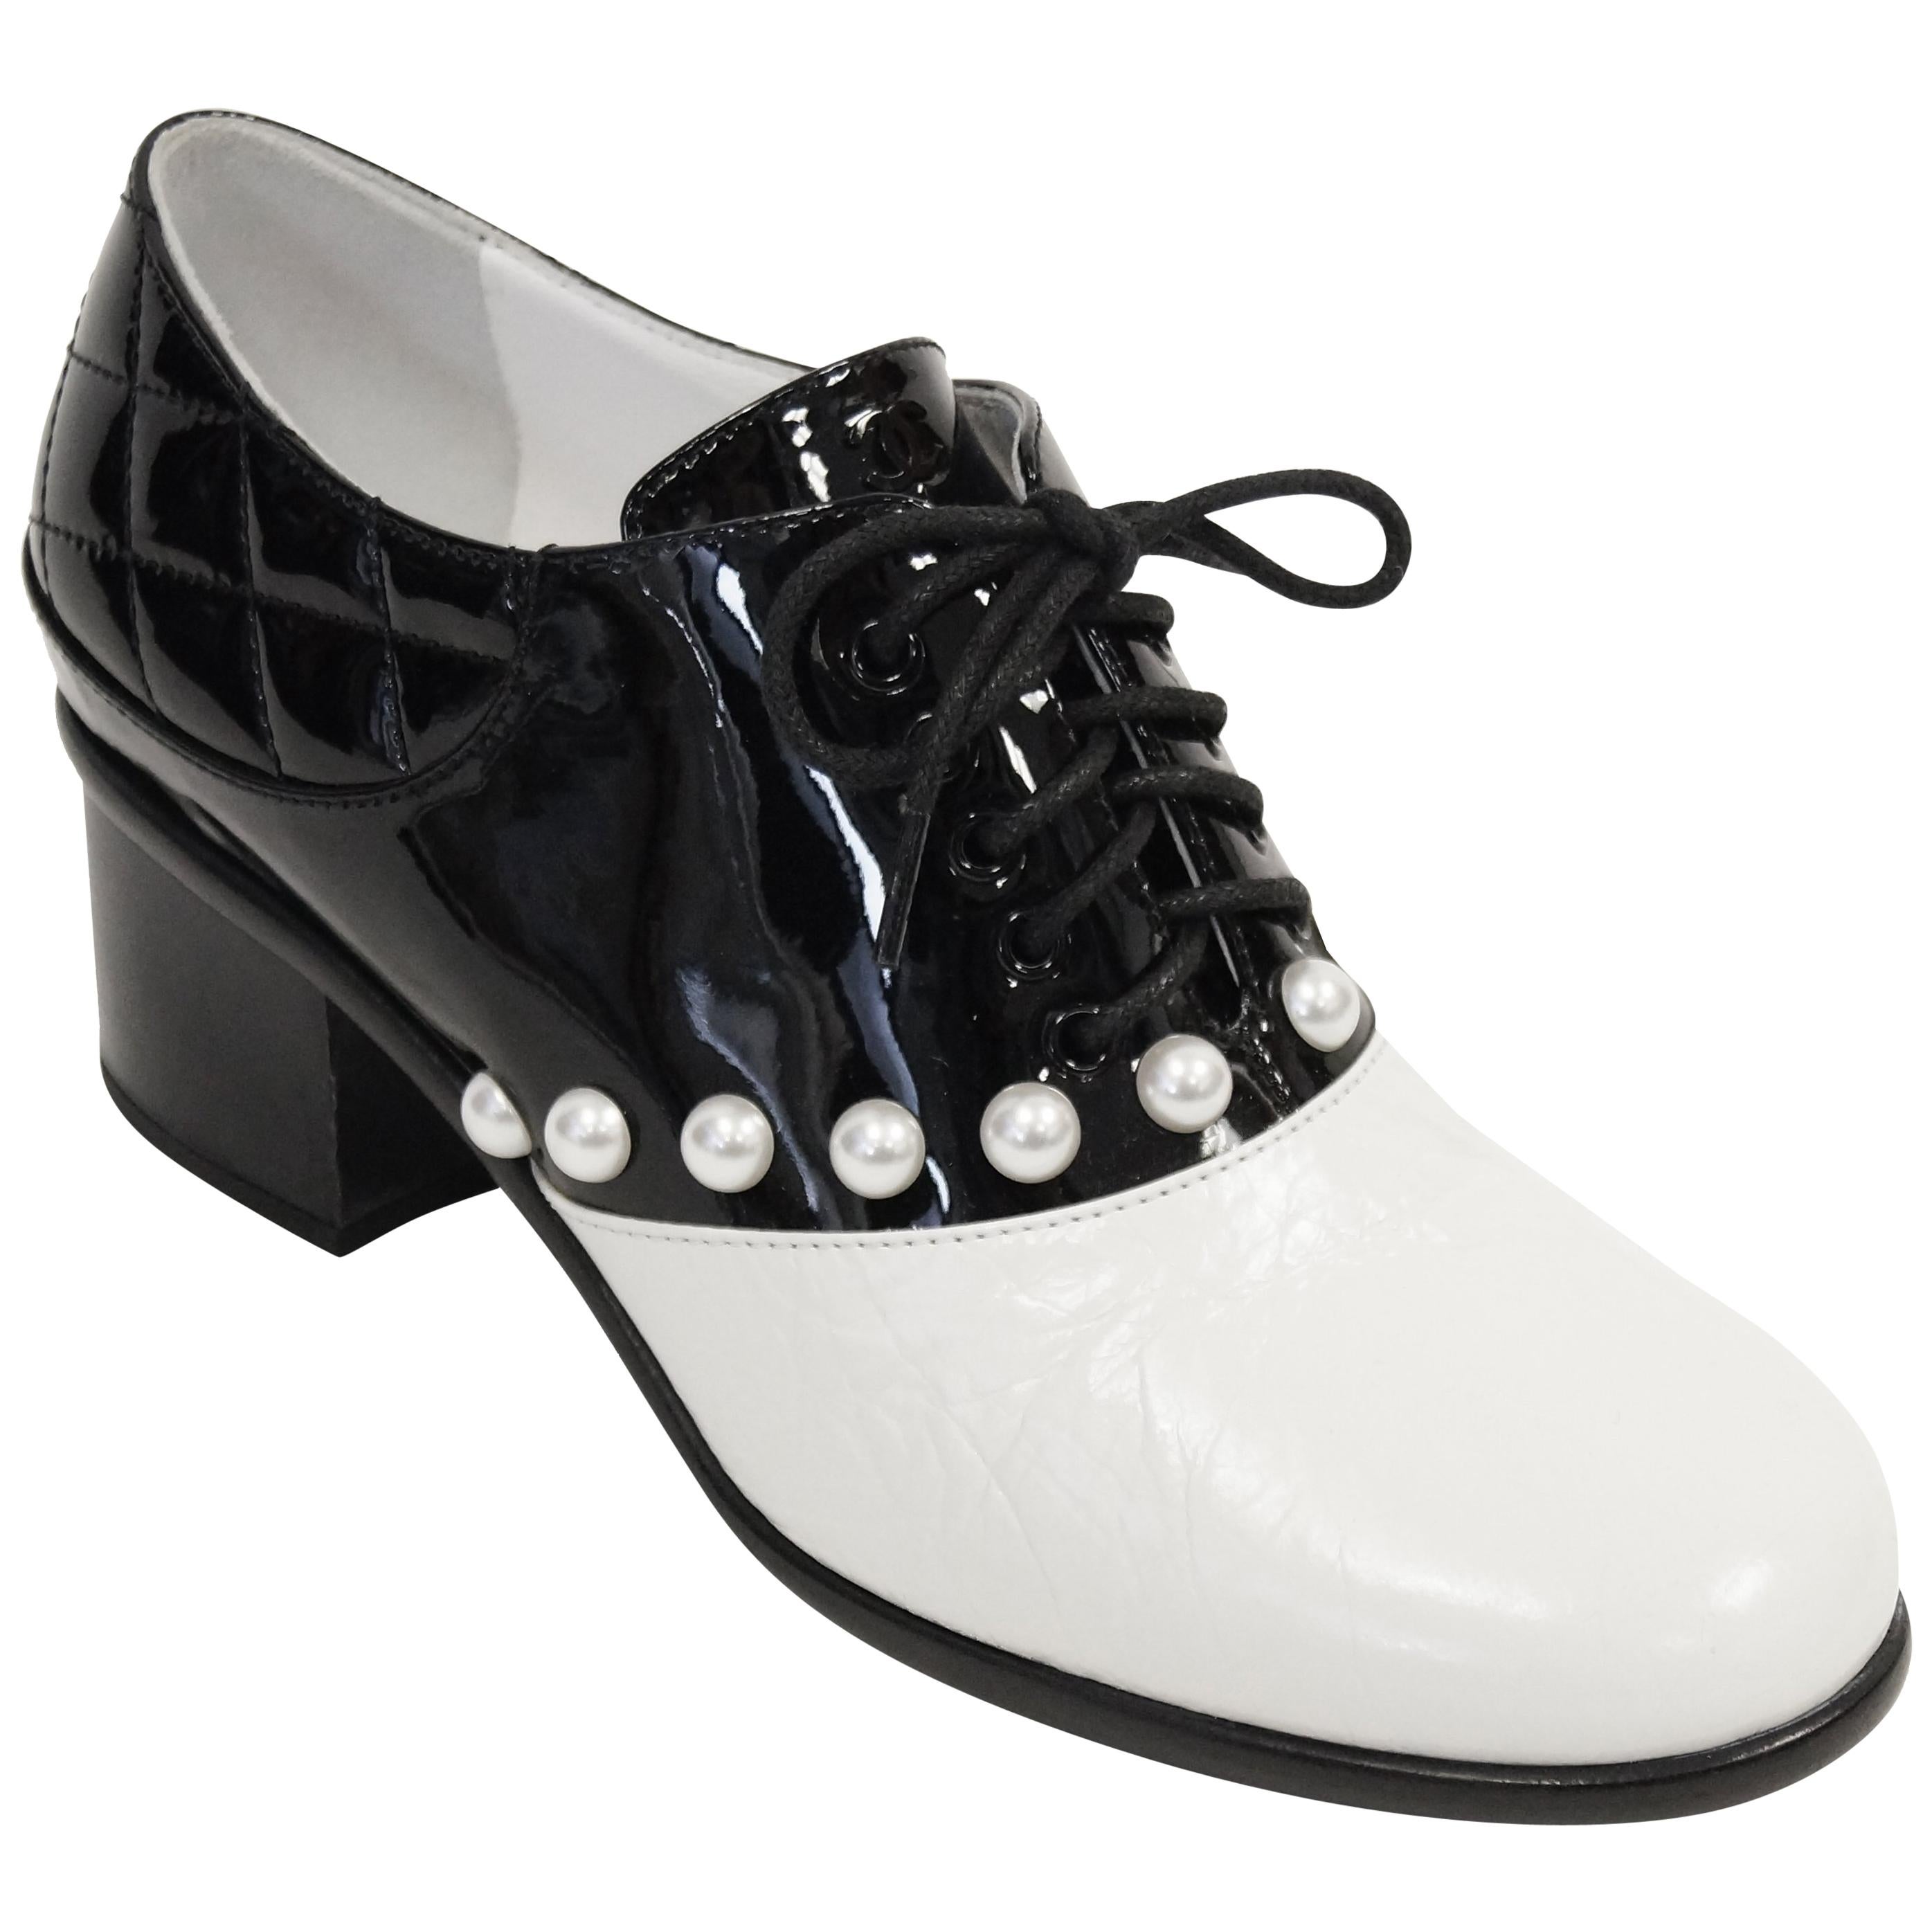 Chanel Black and White Patent Leather Pearl Oxfords, 2014 